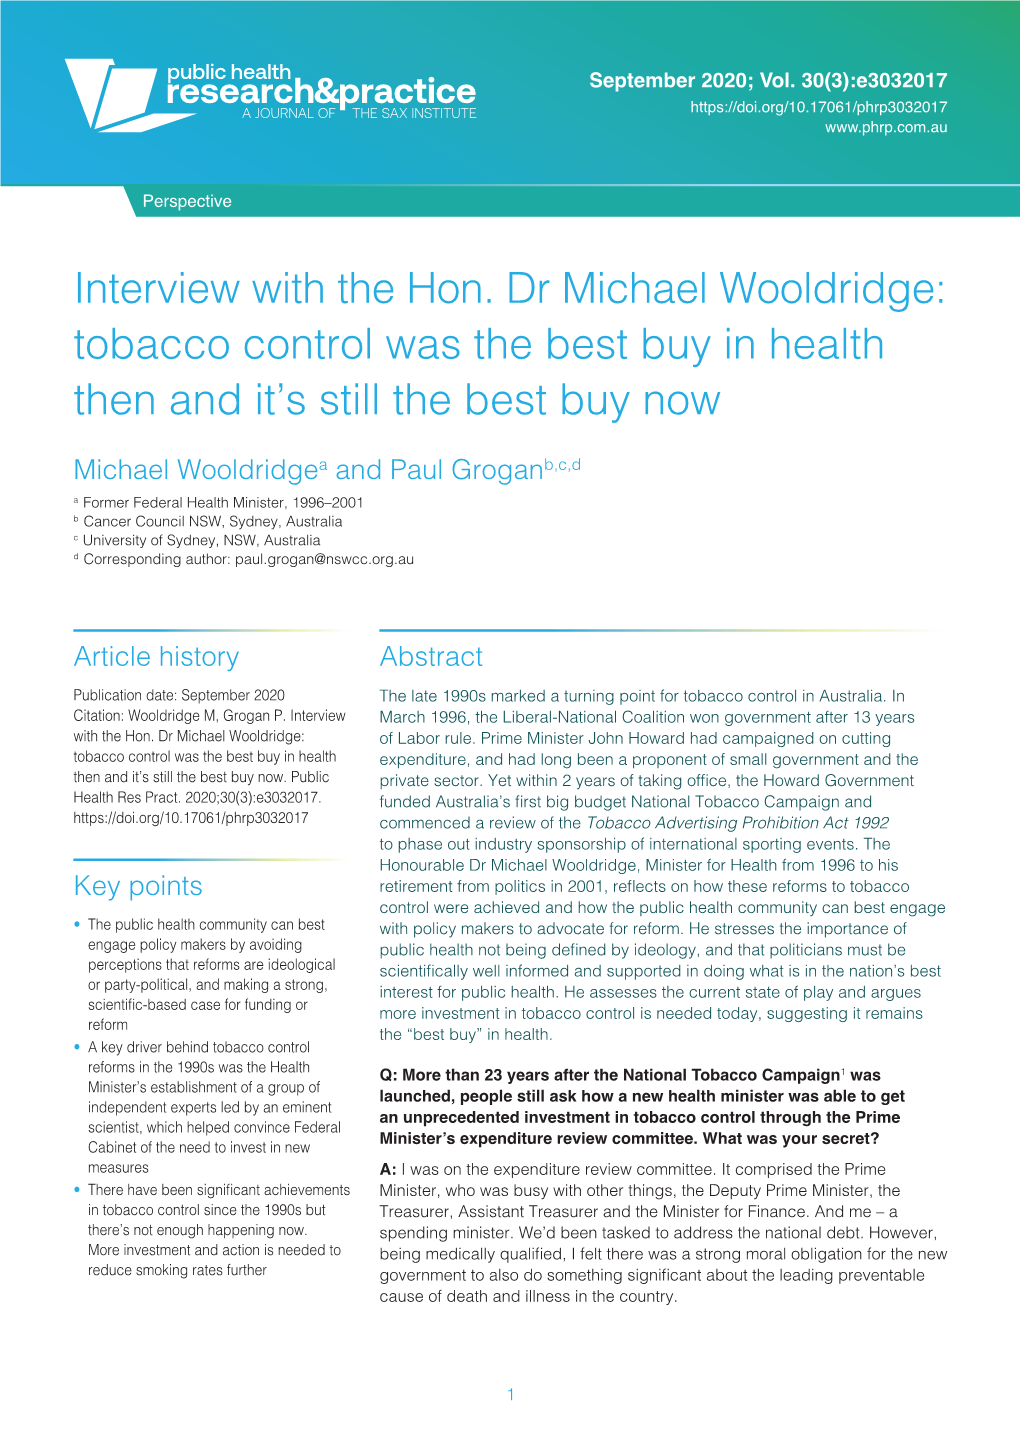 Interview with the Hon. Dr Michael Wooldridge: Tobacco Control Was the Best Buy in Health Then and It’S Still the Best Buy Now